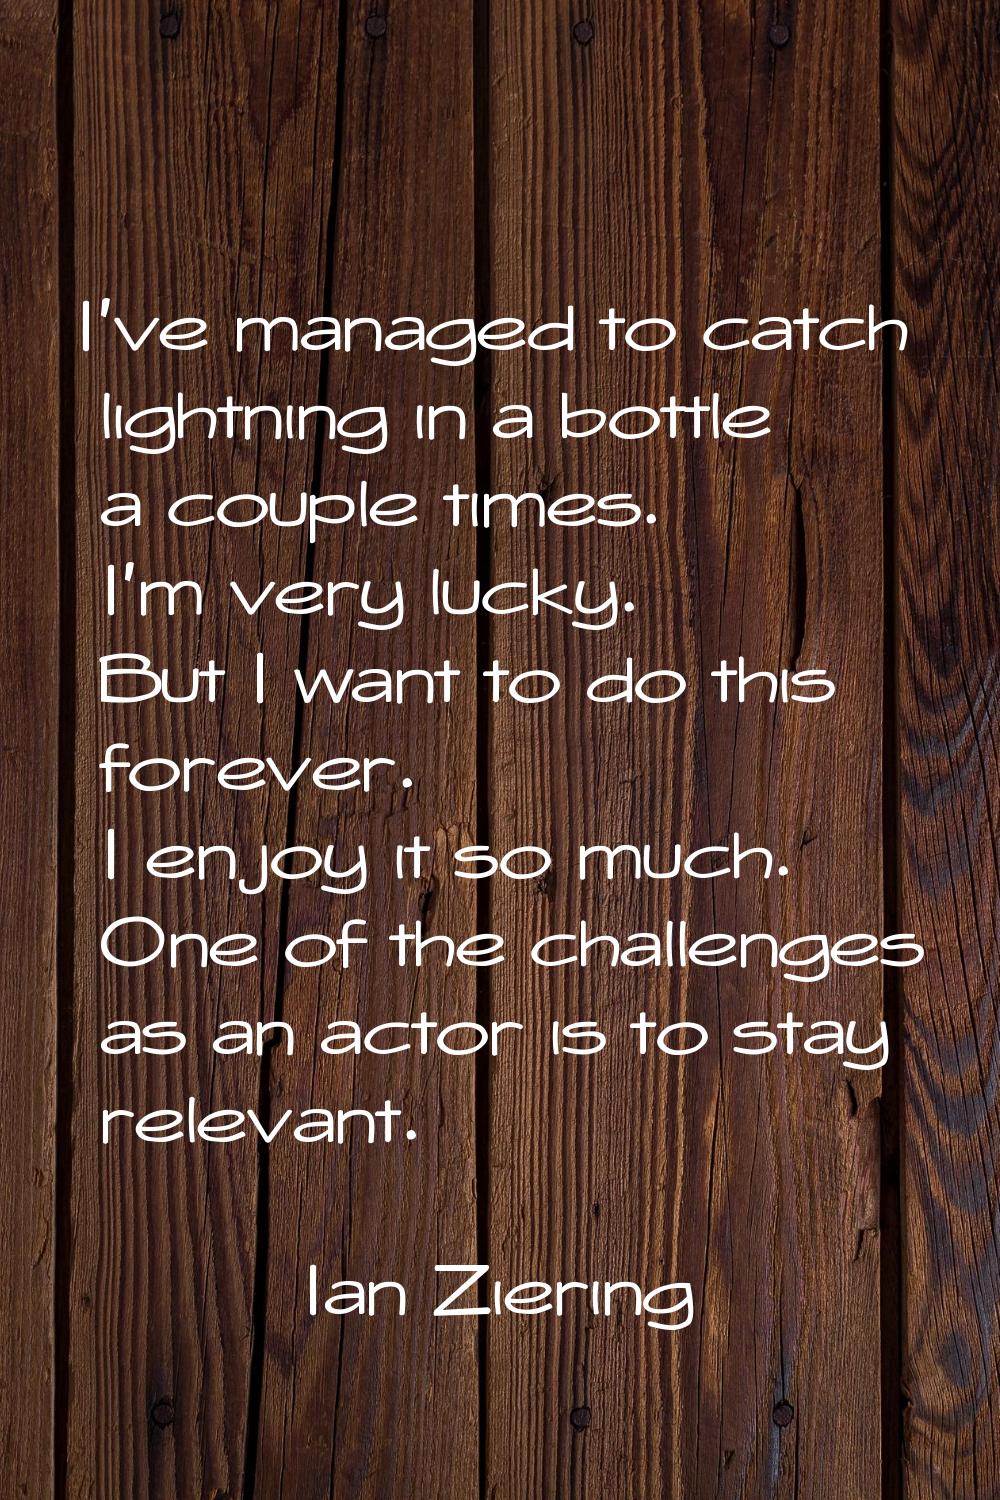 I've managed to catch lightning in a bottle a couple times. I'm very lucky. But I want to do this f